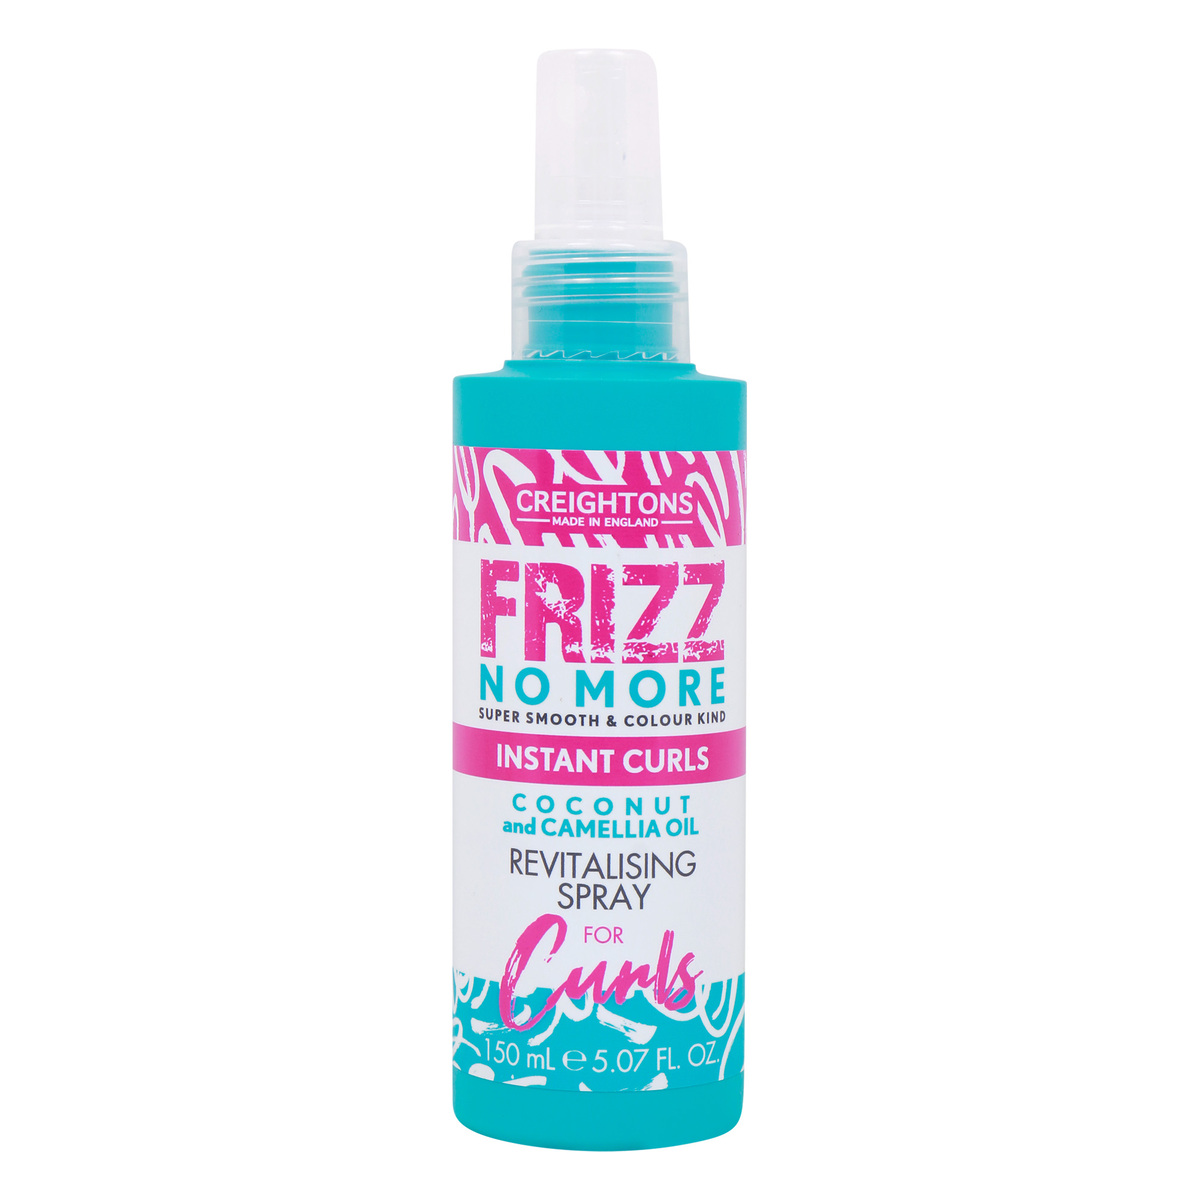 Creightons Frizz No More Instant Curls Revitalising Spray, 150 ml